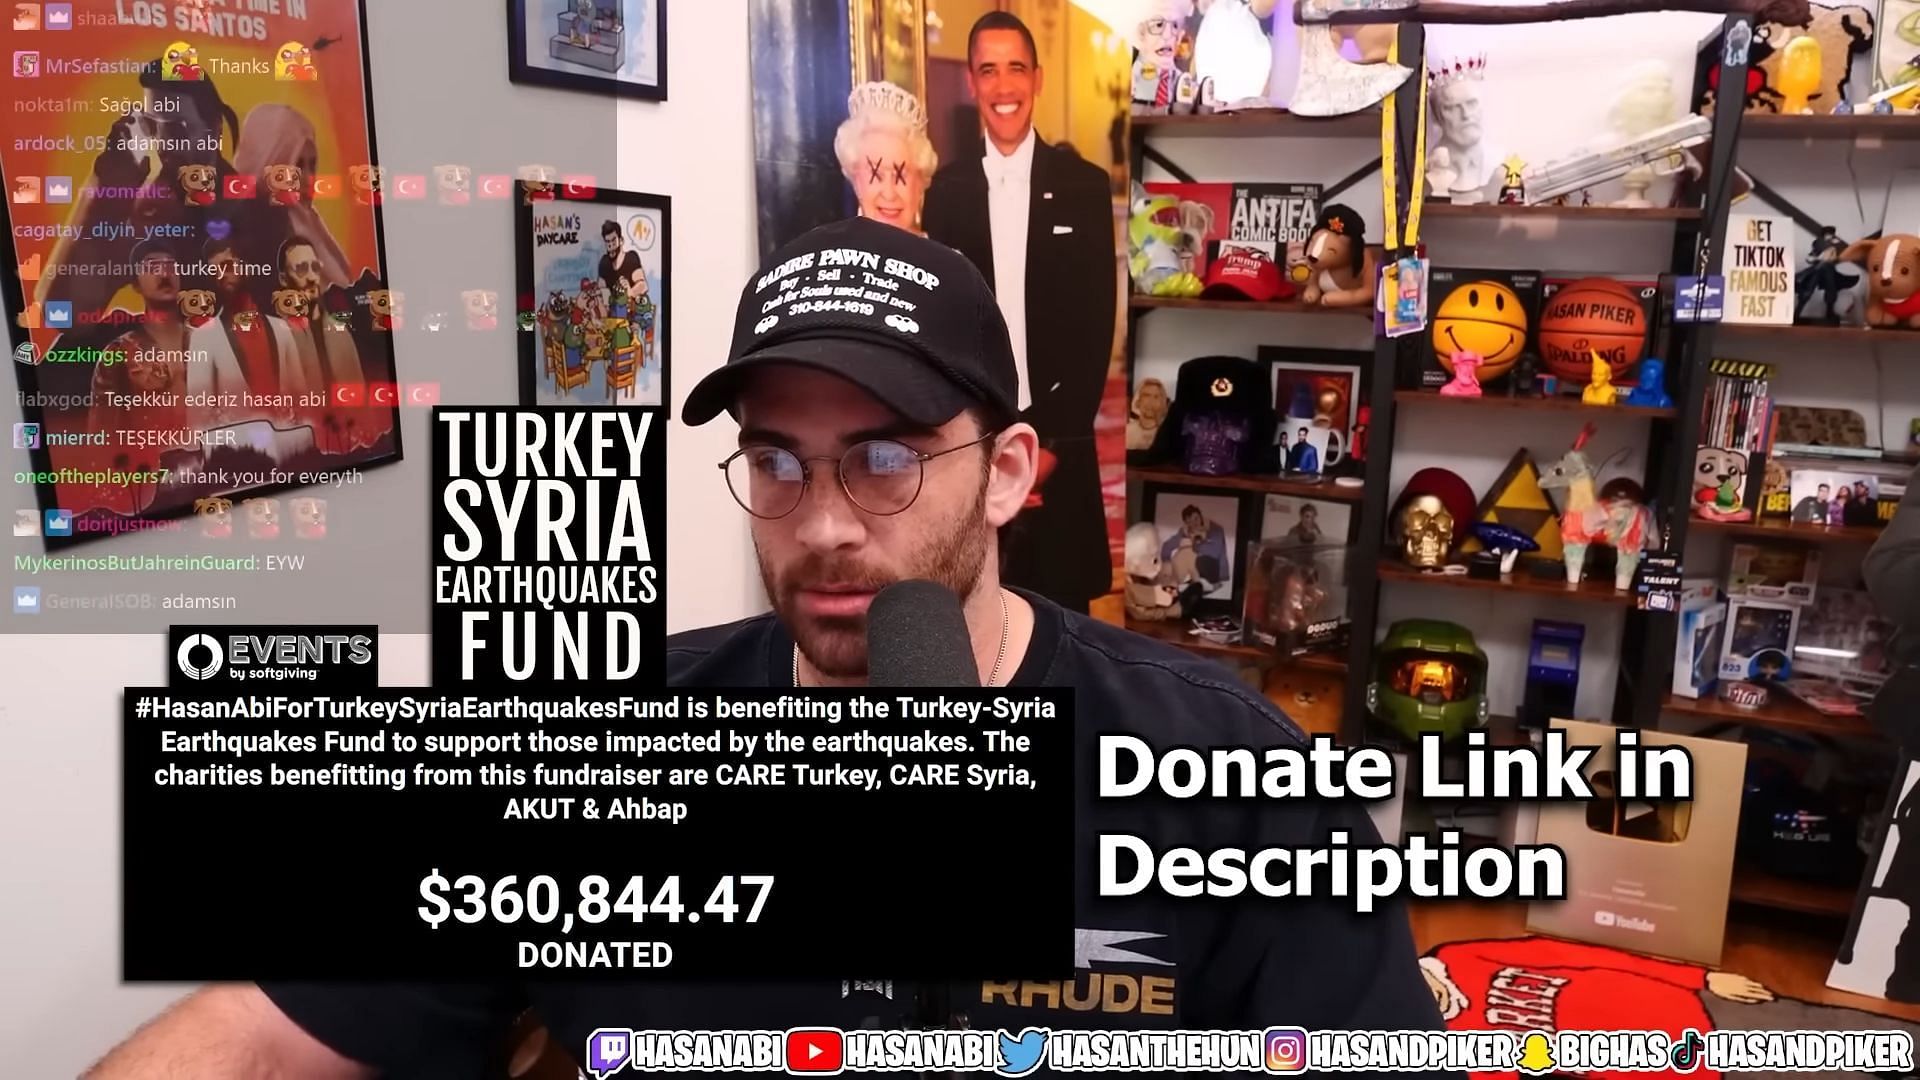 HasanAbi talks about trolls criticizing him for fundraiser for earthquake victims in Turkey and Syria (Image via HasanAbi/YouTube)